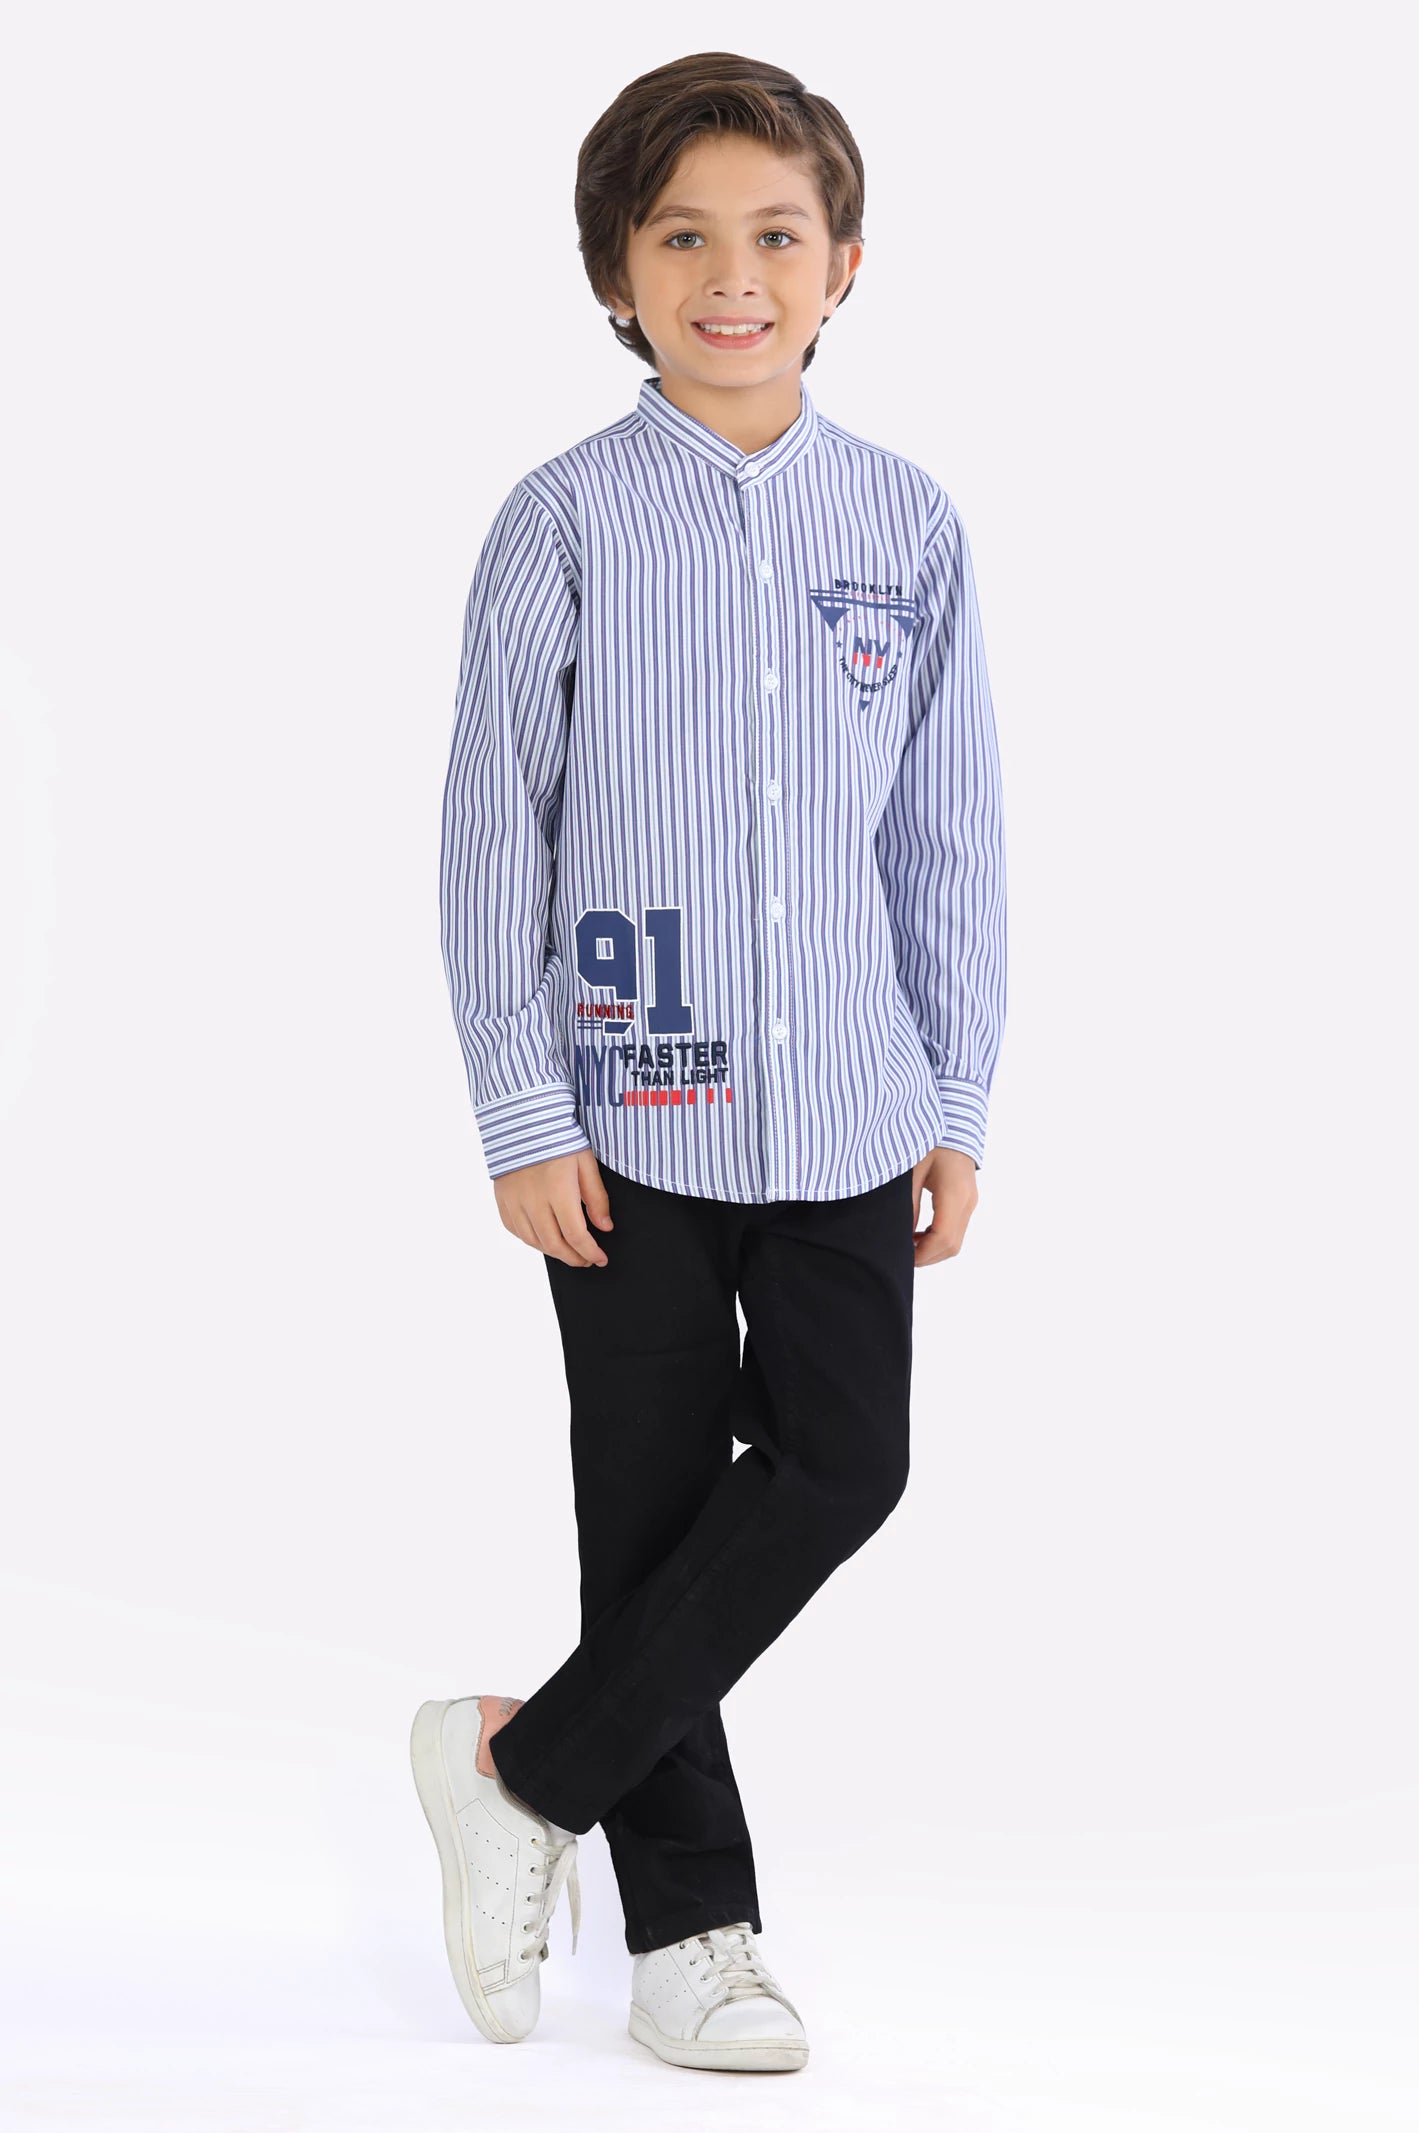 Multicolor Shadow Stripe Boys Shirt From Diners